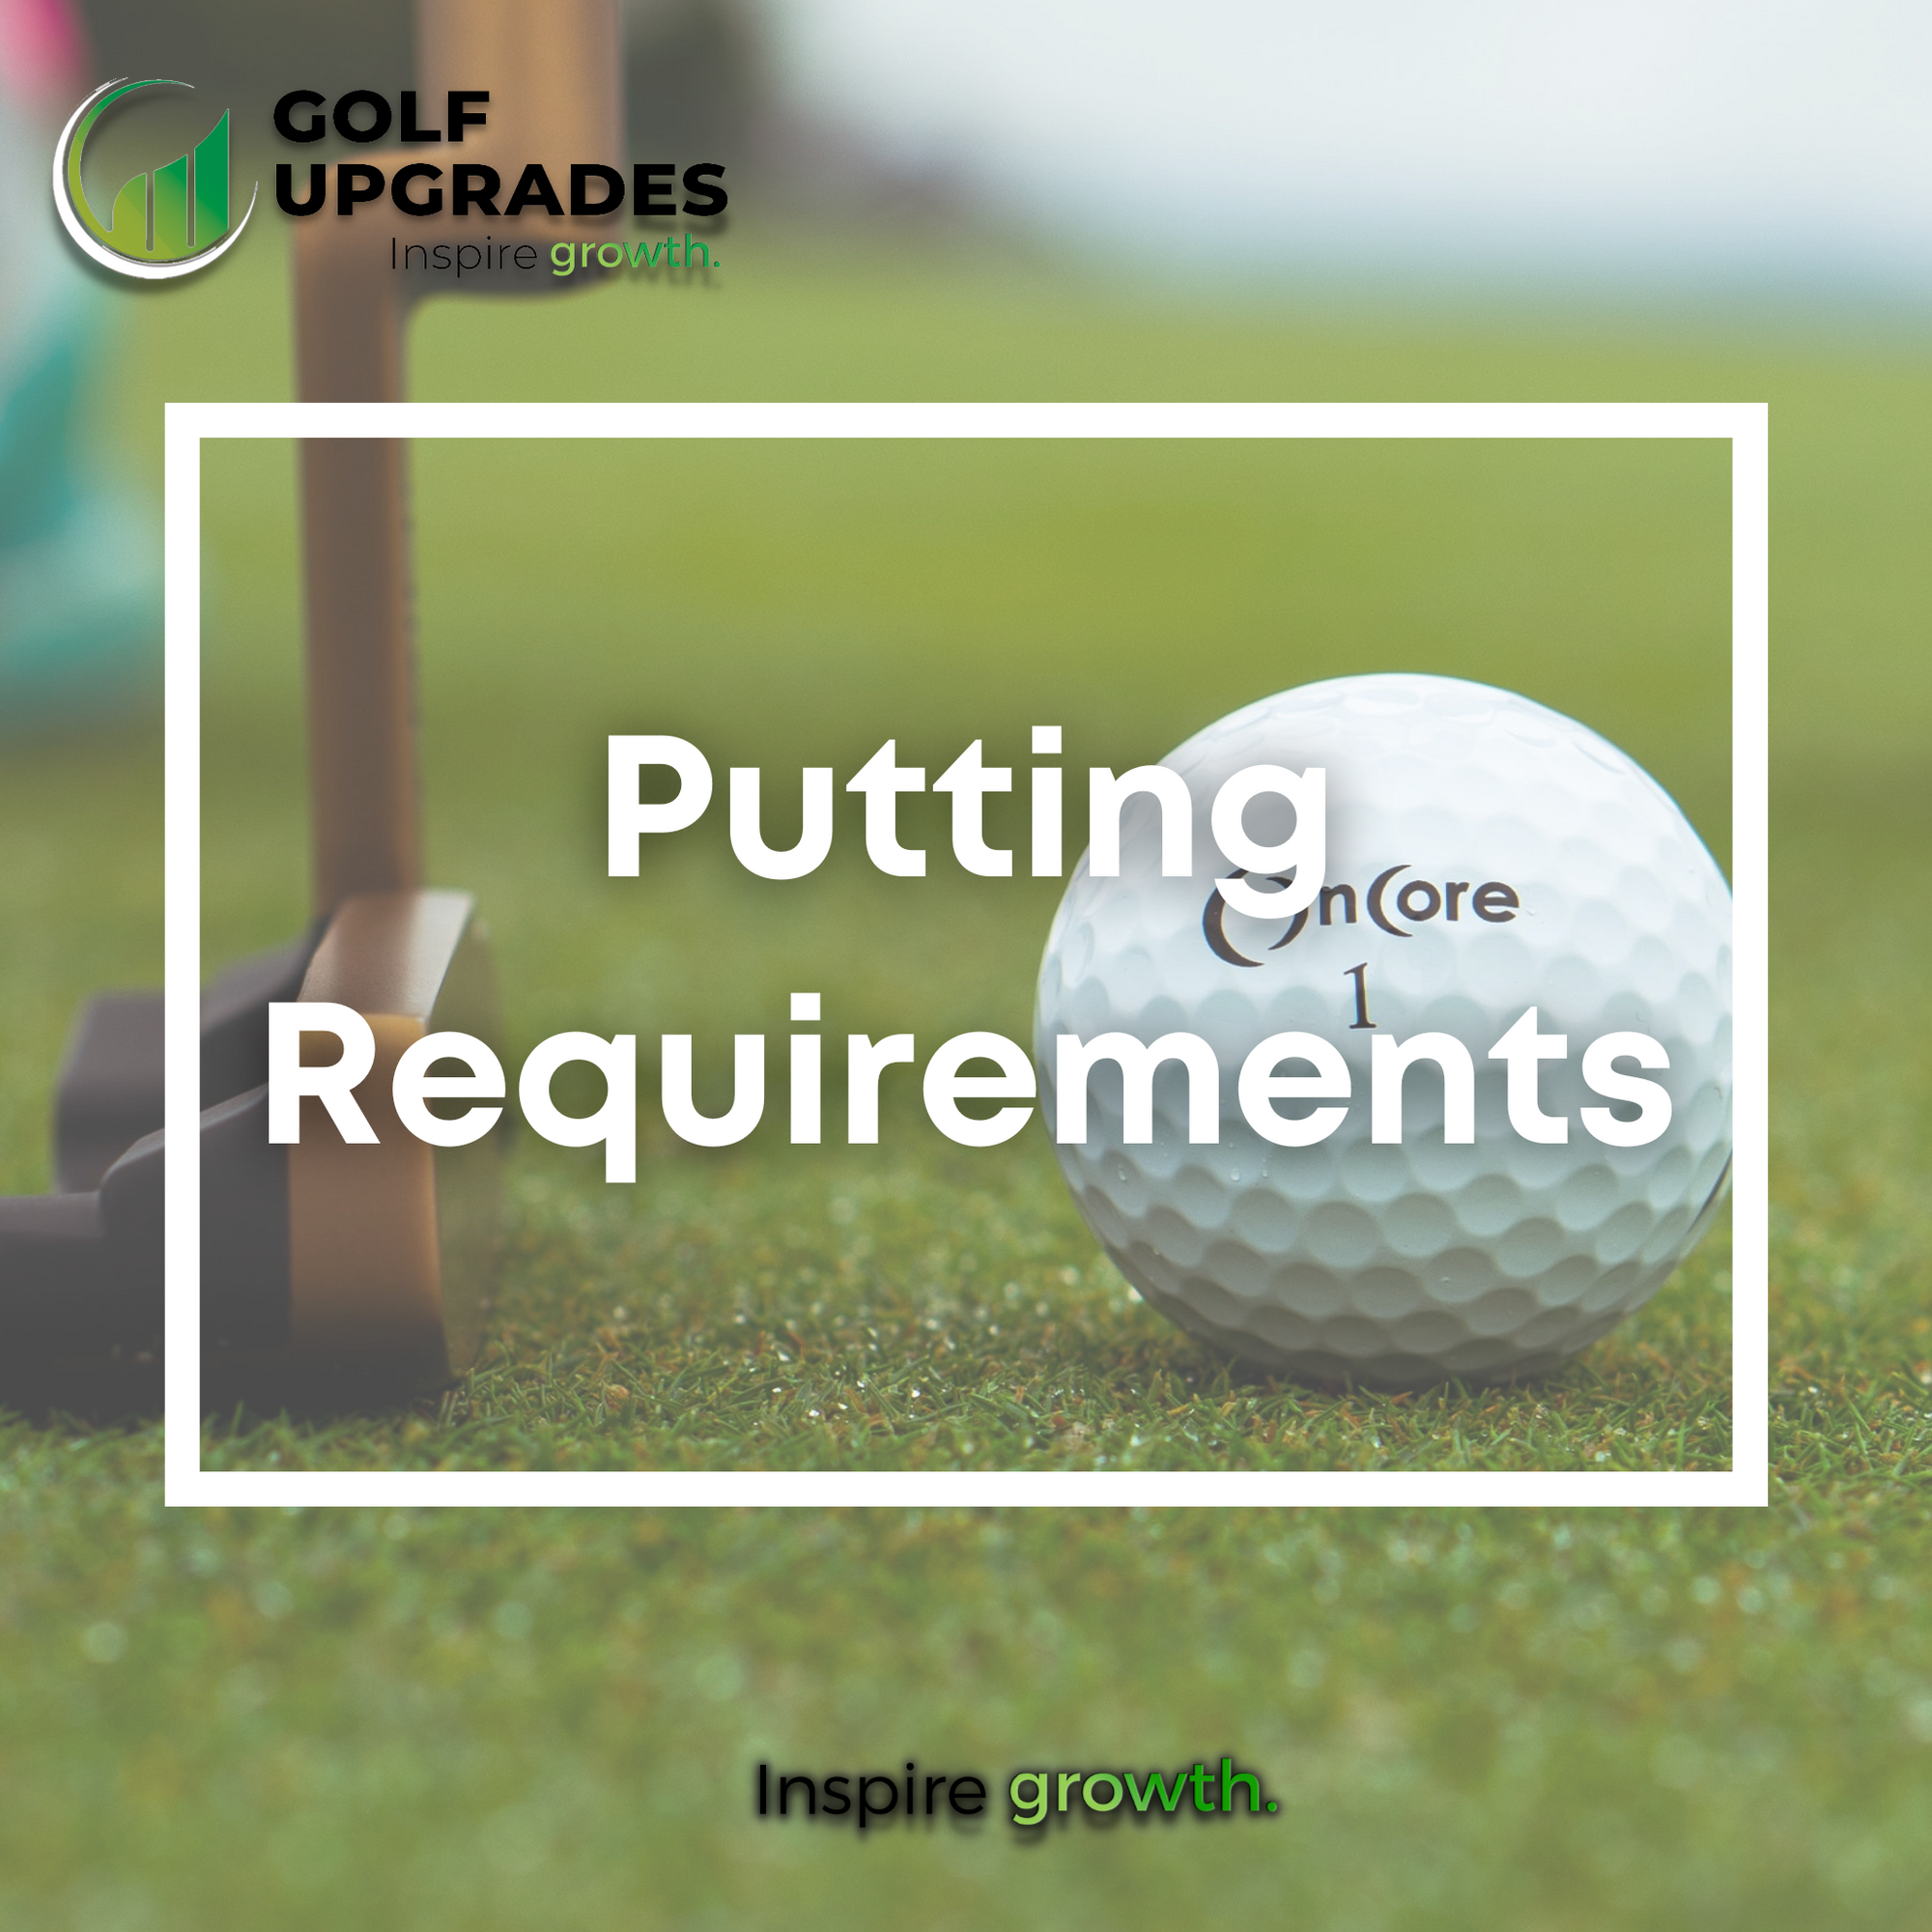 Requirements for Golf Putting | Golf Upgrades